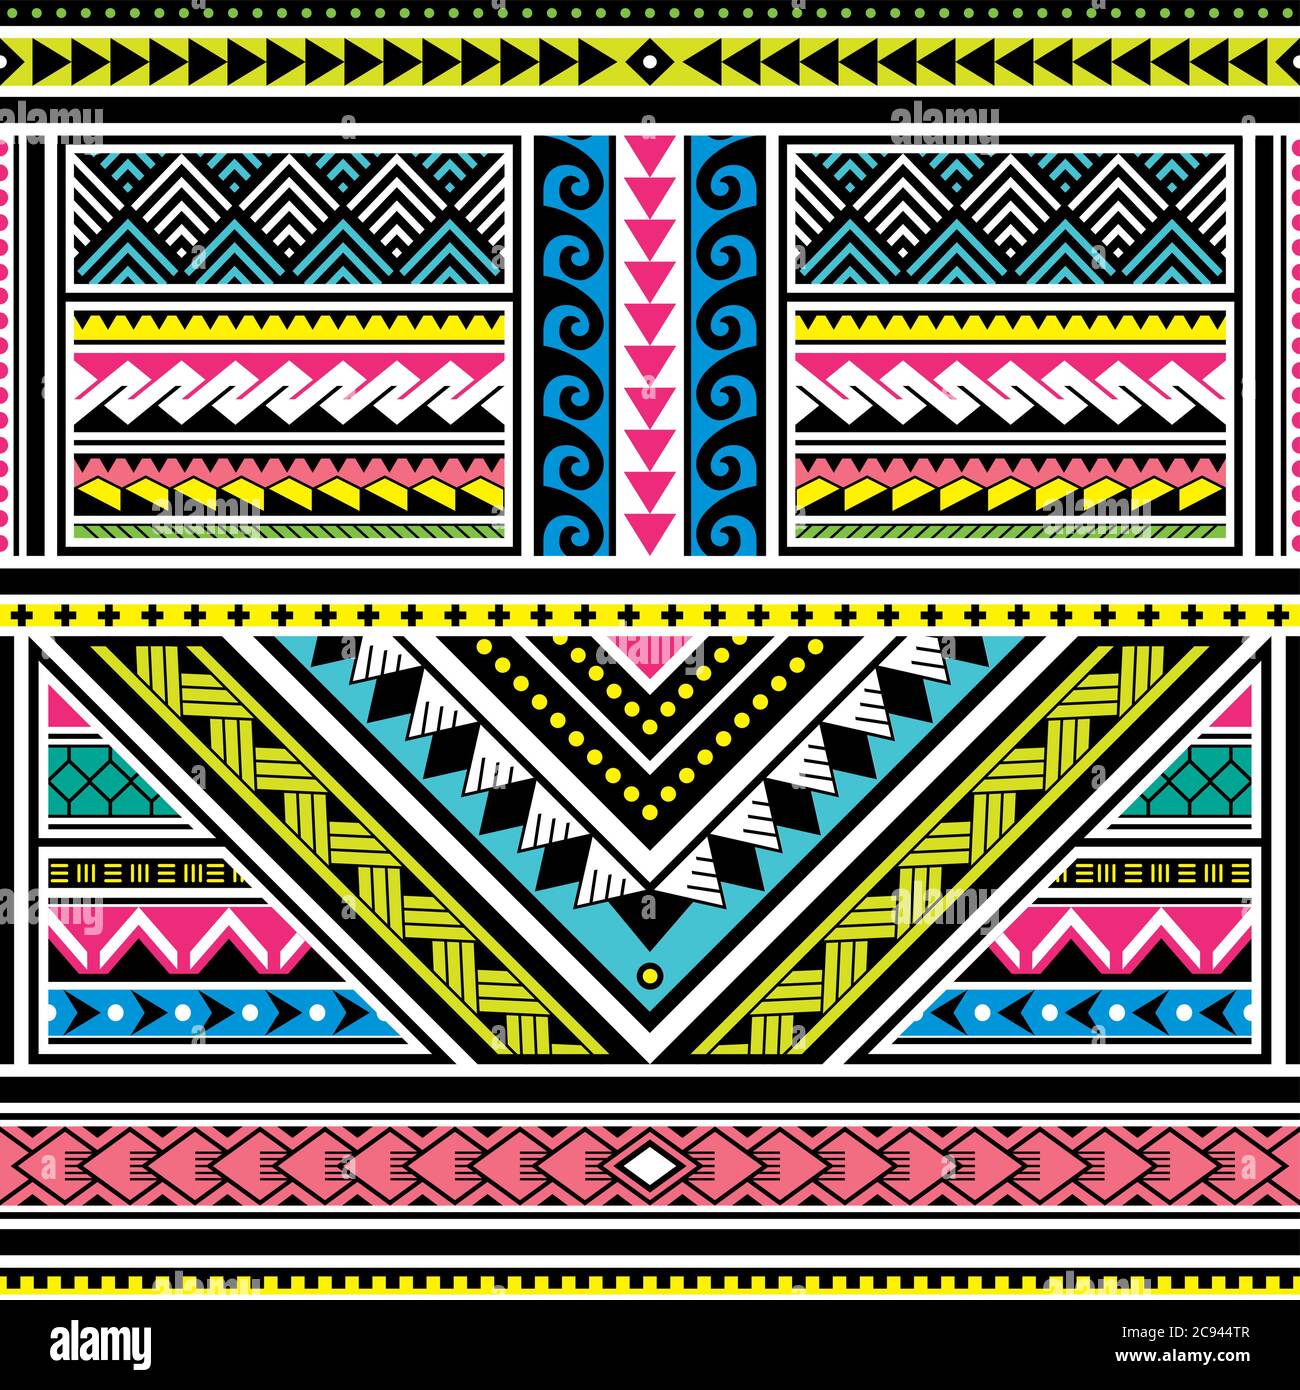 Polynesian tattoo seamless vector colorful pattern, Hawaiian tribal design inspired by art traditional geometric art from islands on Pacific Ocean Stock Vector